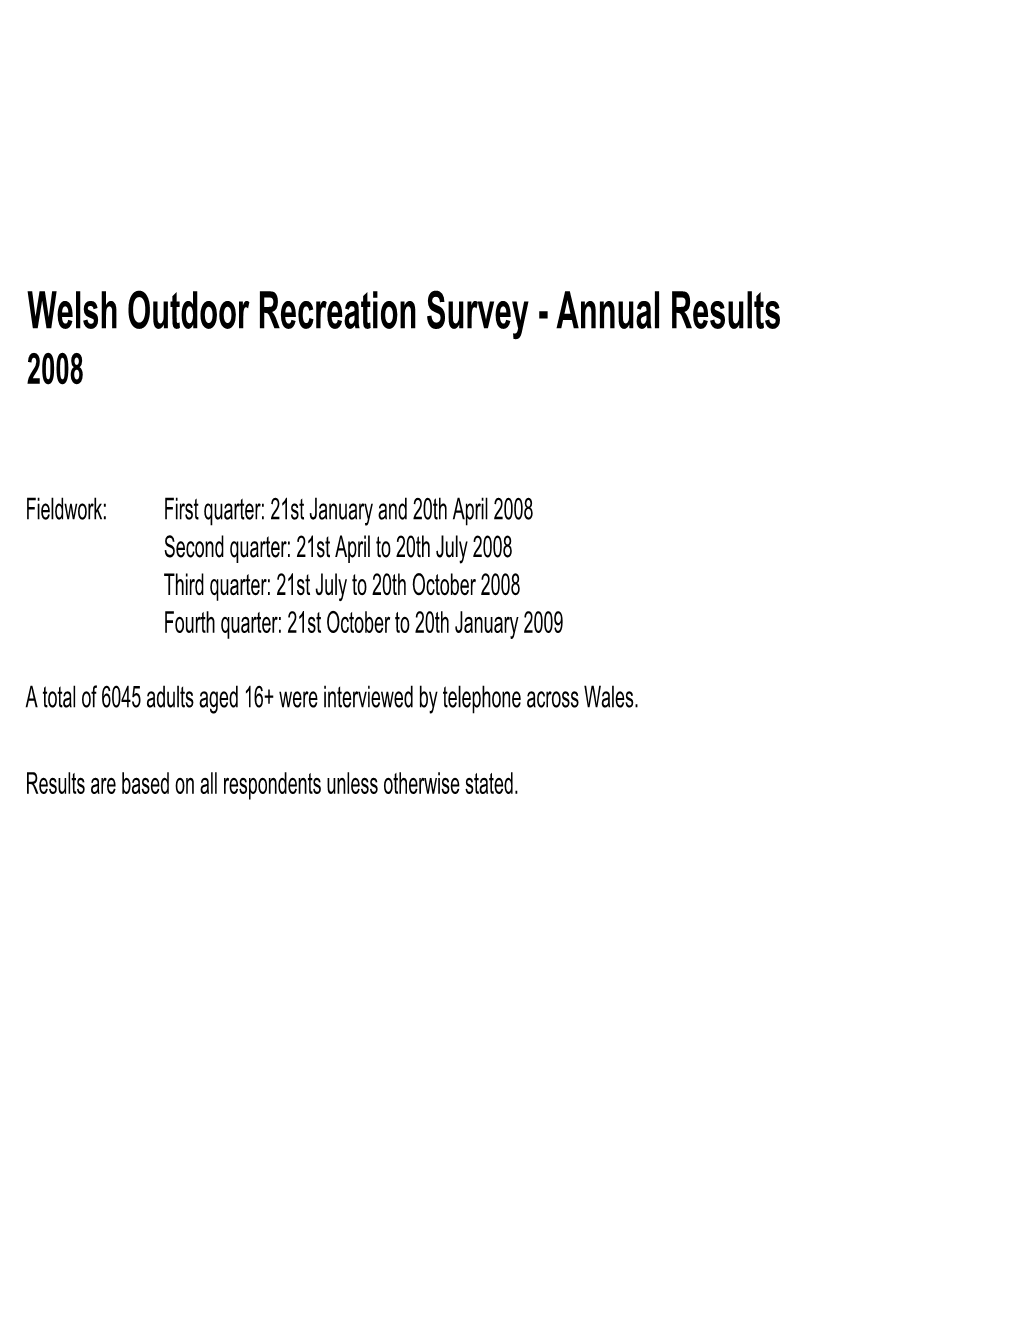 Welsh Outdoor Recreation Survey - Annual Results 2008